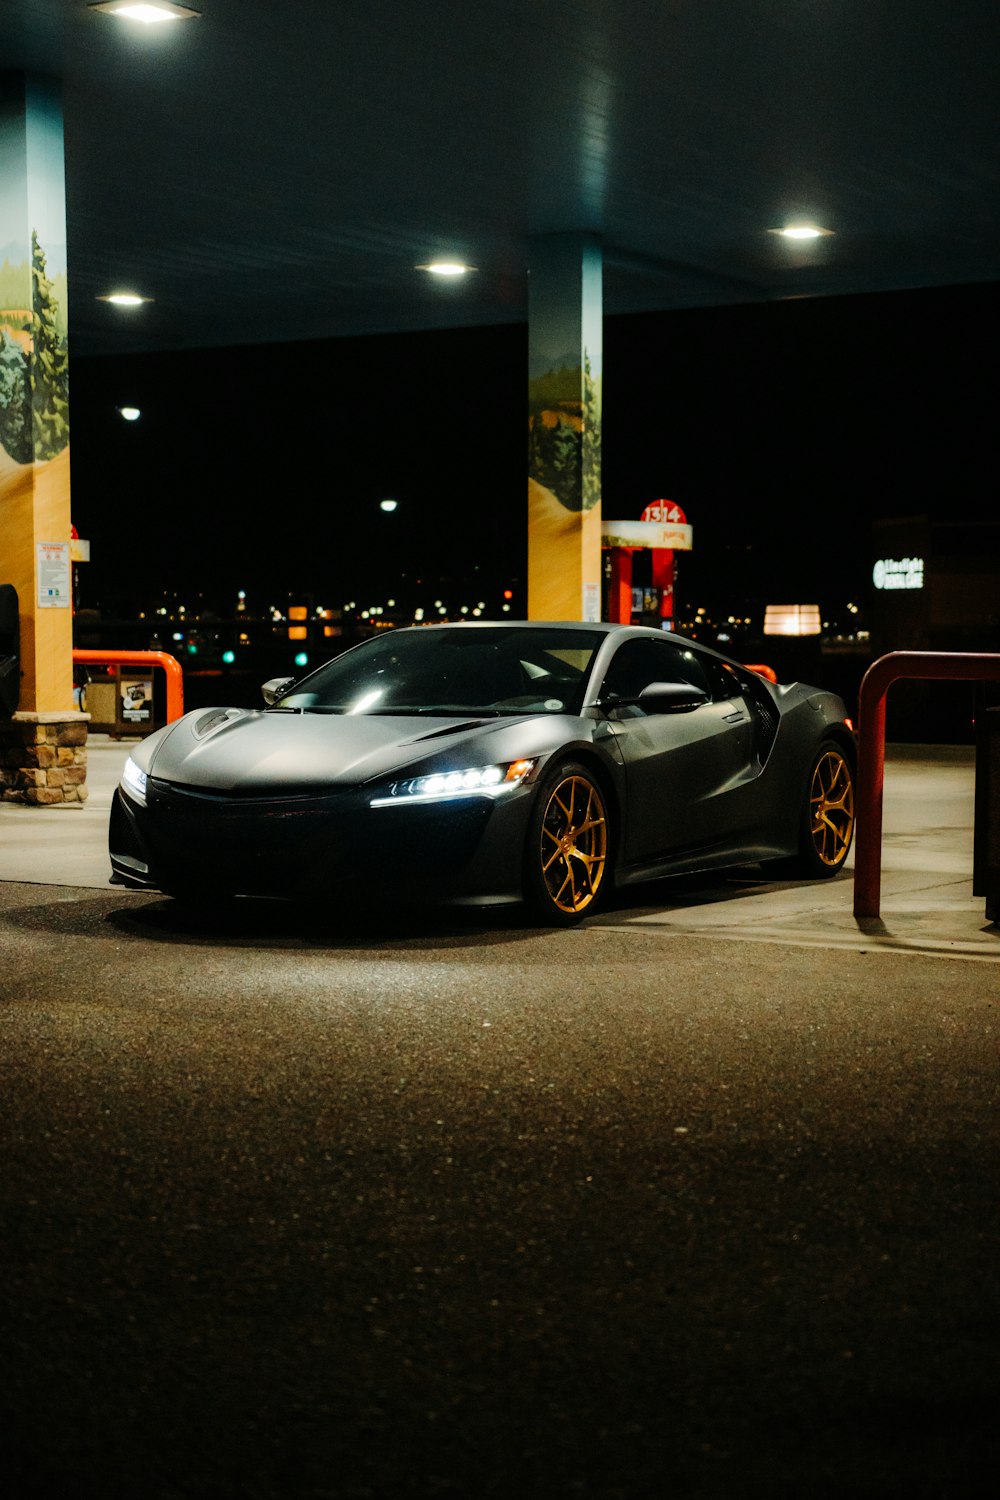 black porsche 911 parked on parking lot during night time